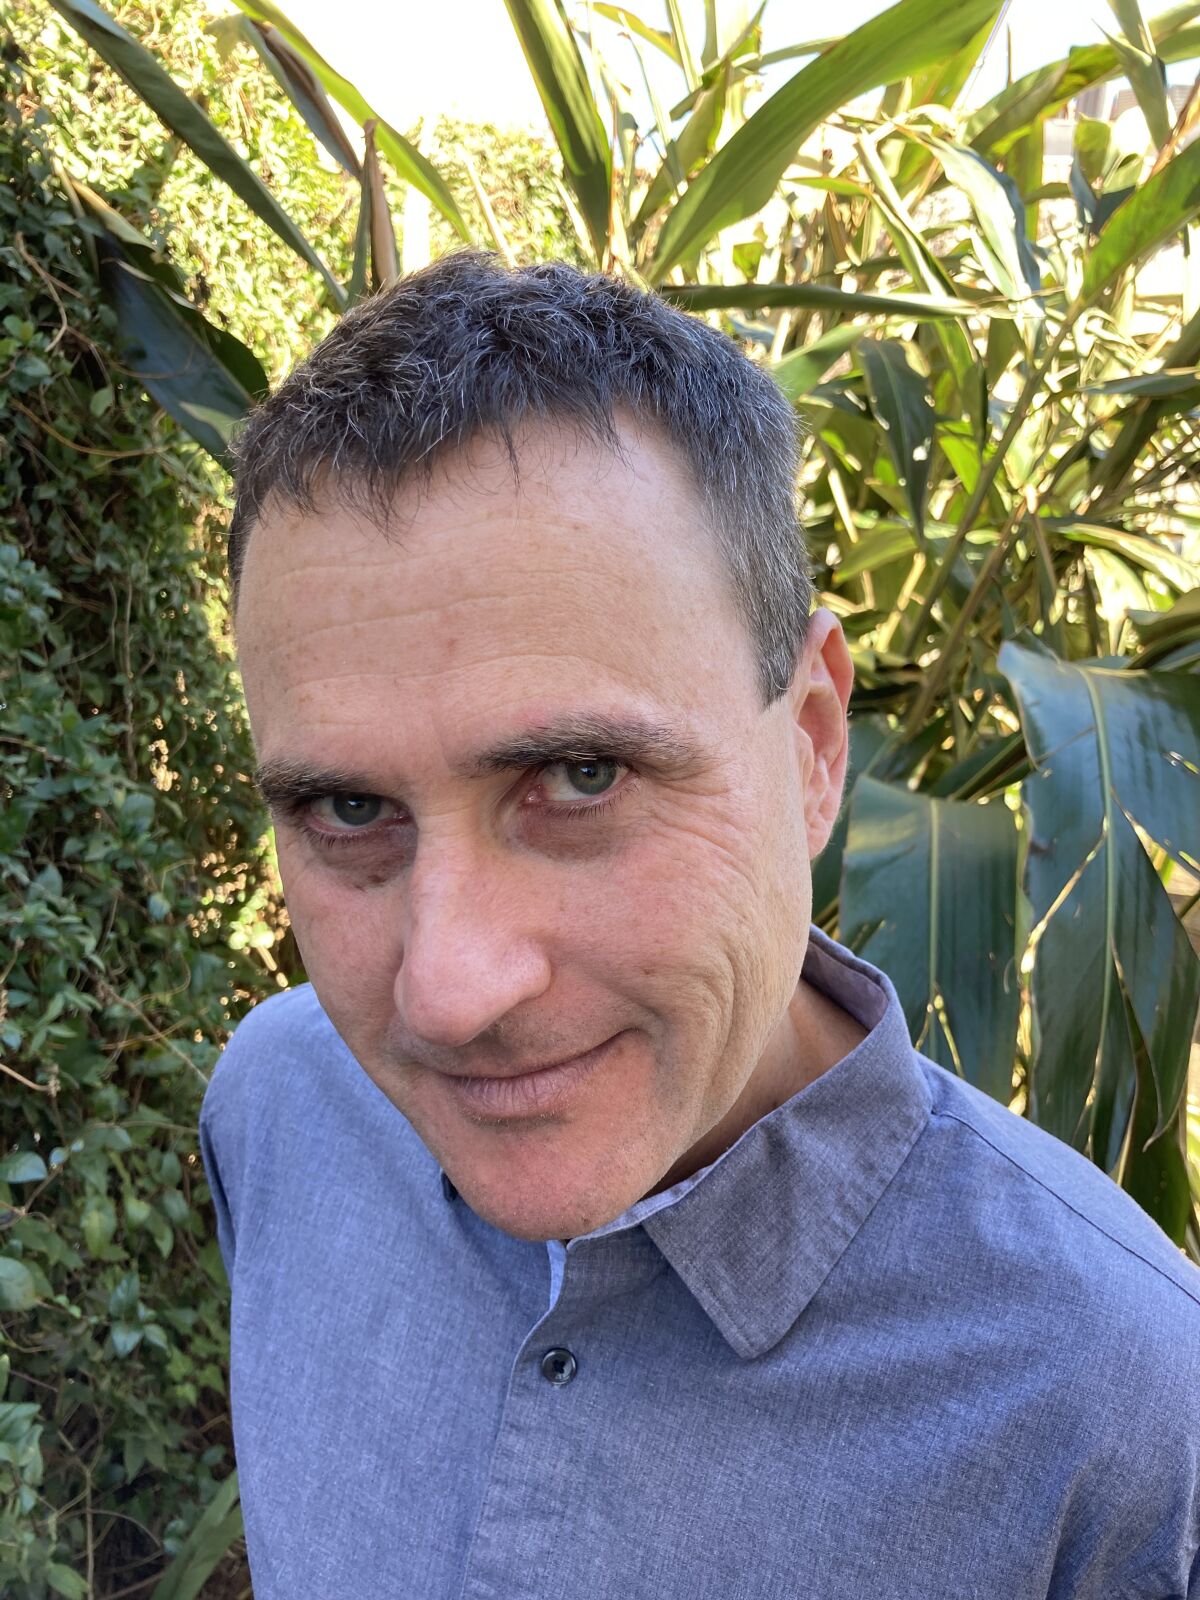 A man in a blue button-down standing among plants looks up at the camera 